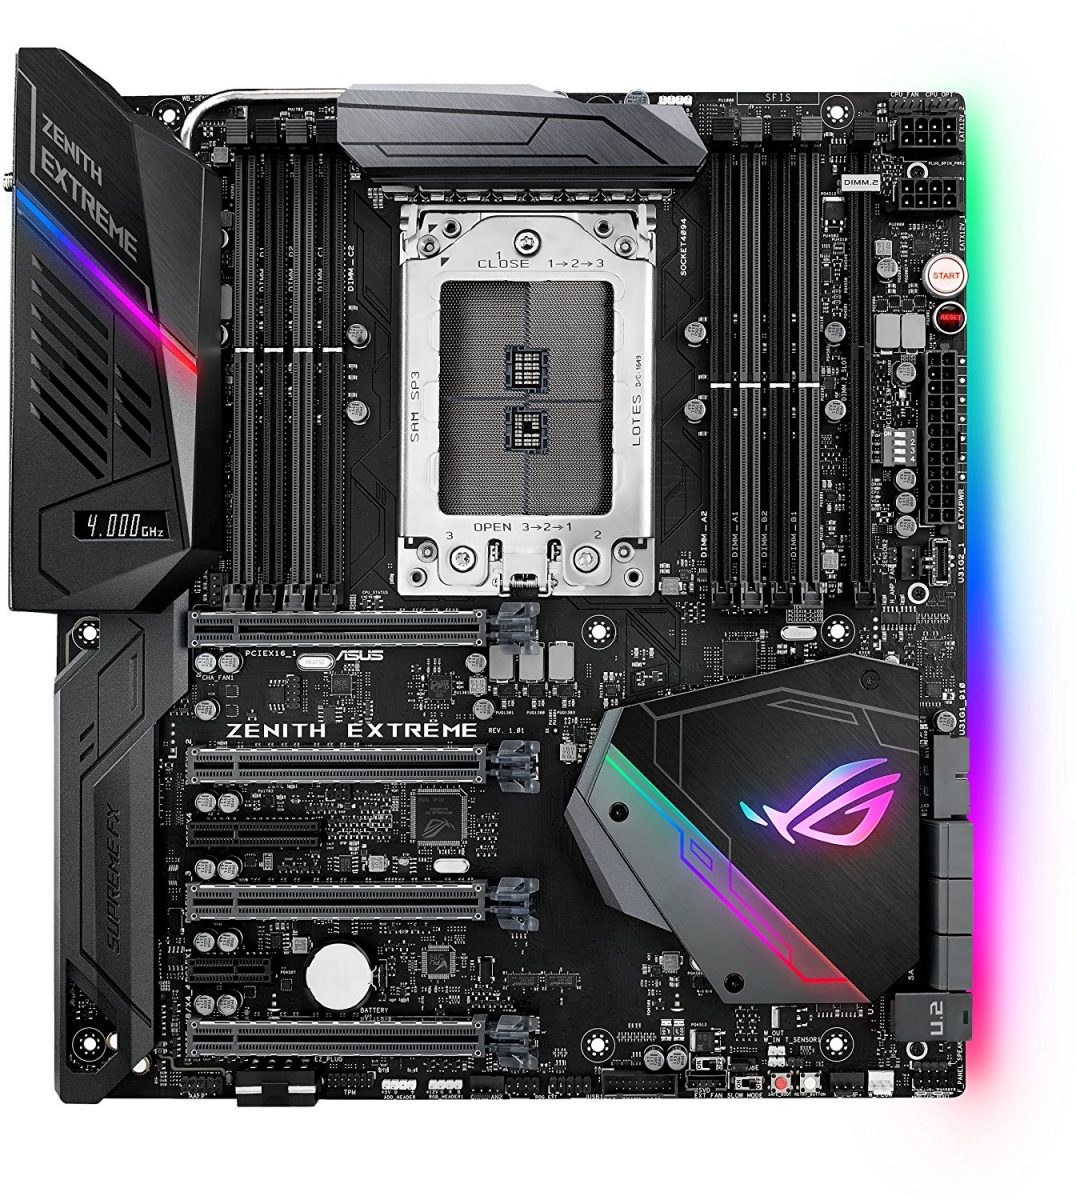 ASUS ROG Zenith Extreme X399 Motherboard